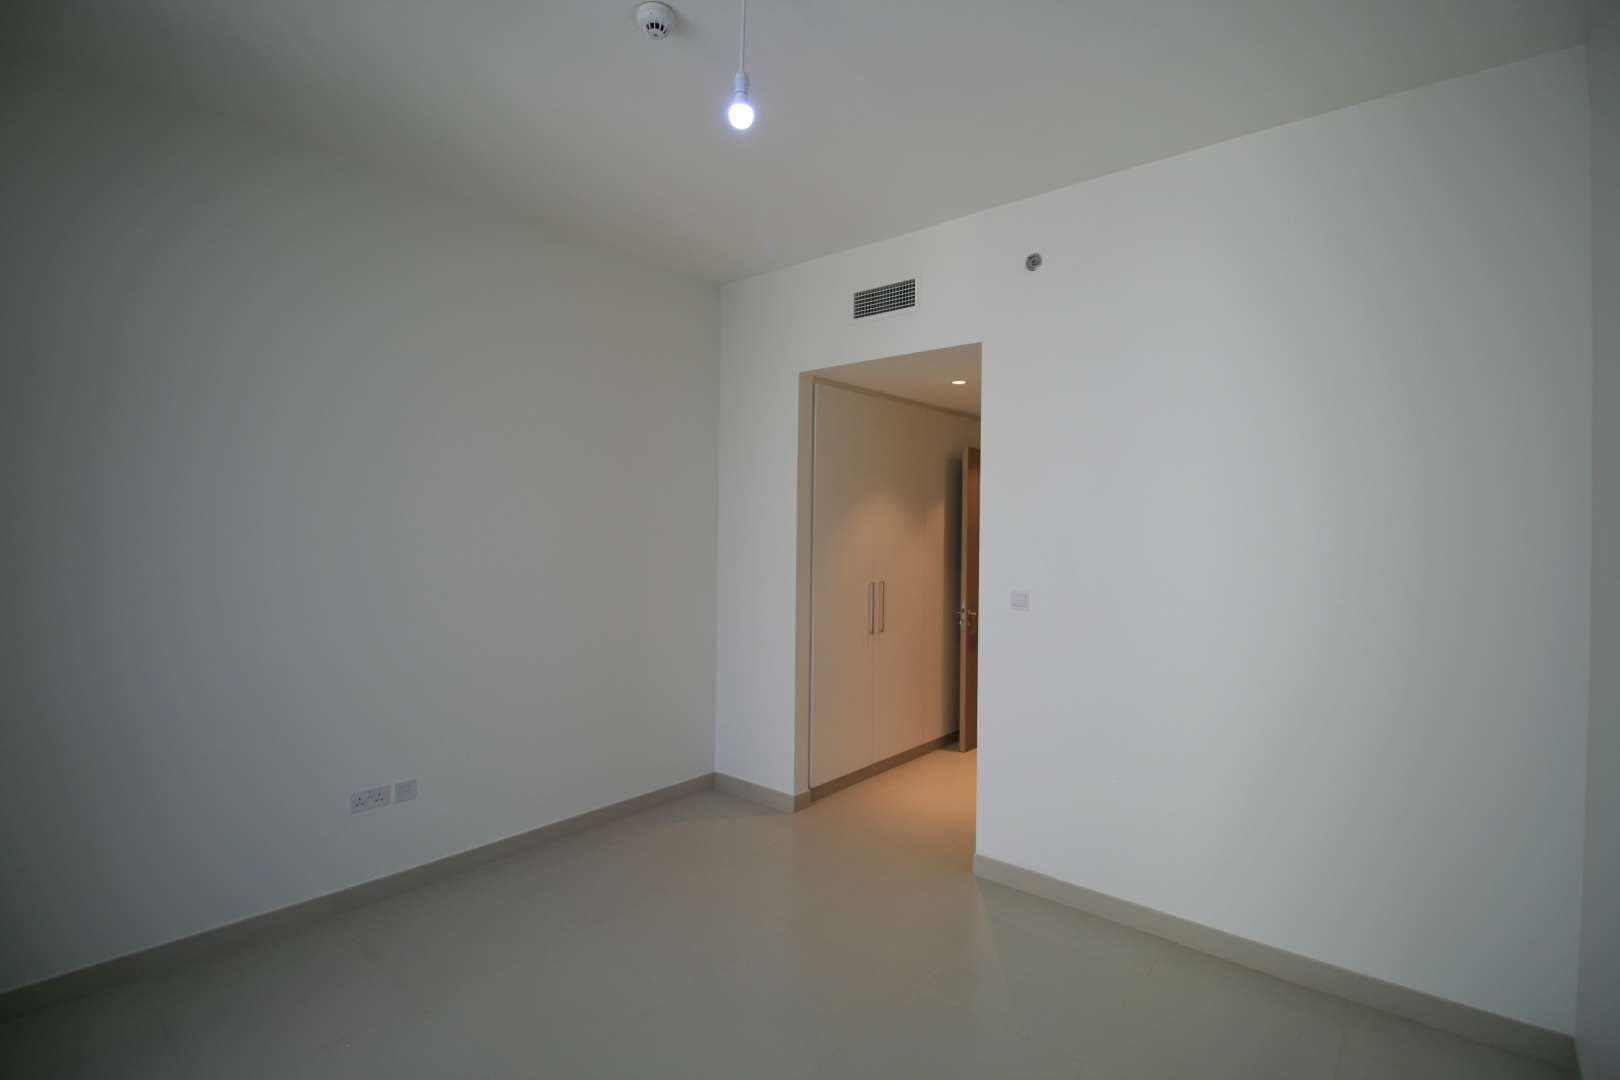 2 Bedroom Apartment For Rent Acacia Park Heights Lp05570 26089772445e1400.jpg